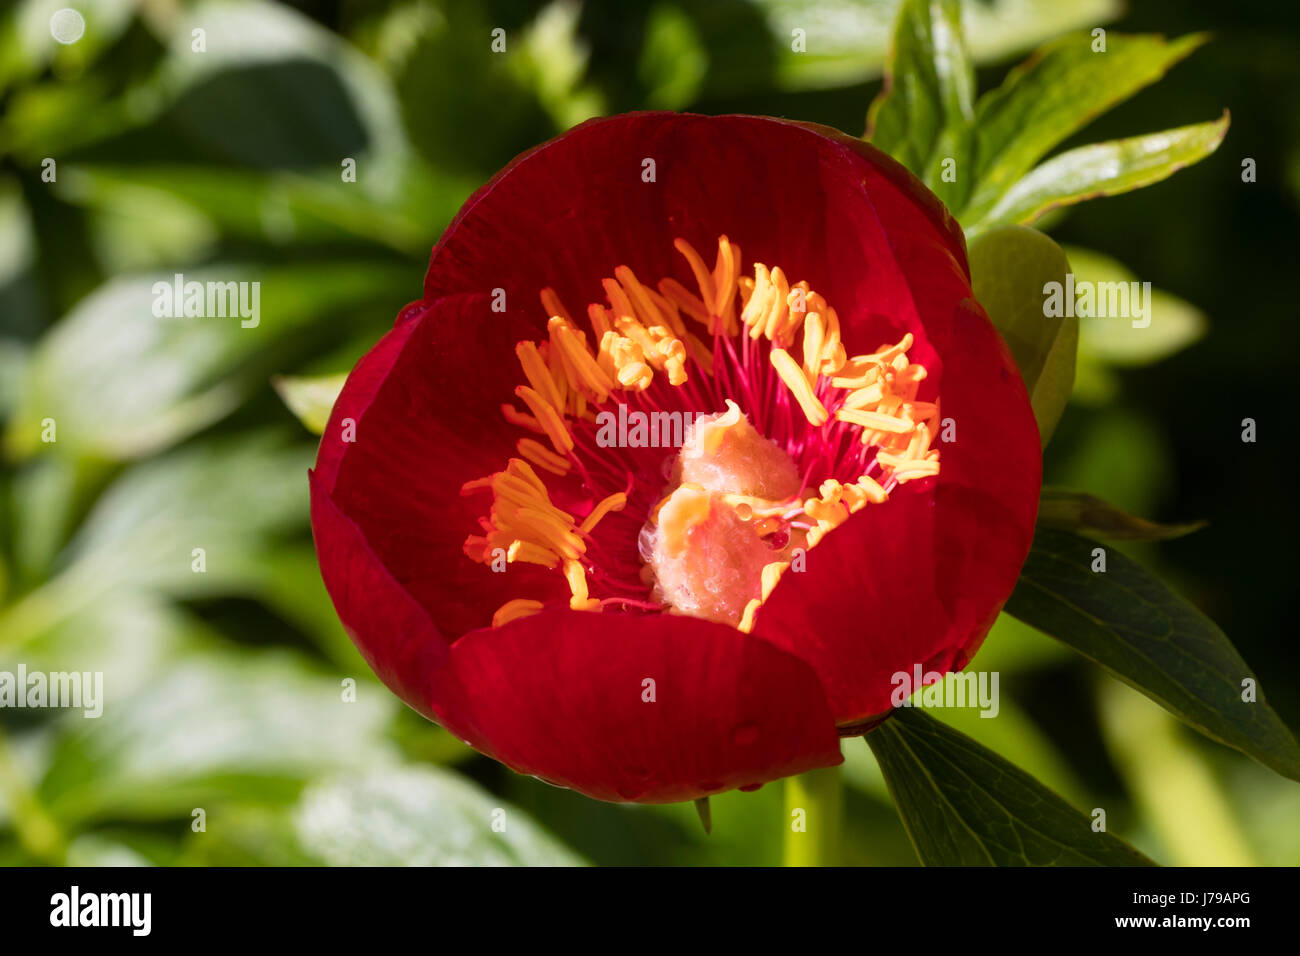 Red, bowl shaped flower of the summer flowering species peony, Paeonia peregrina var. romanica Stock Photo